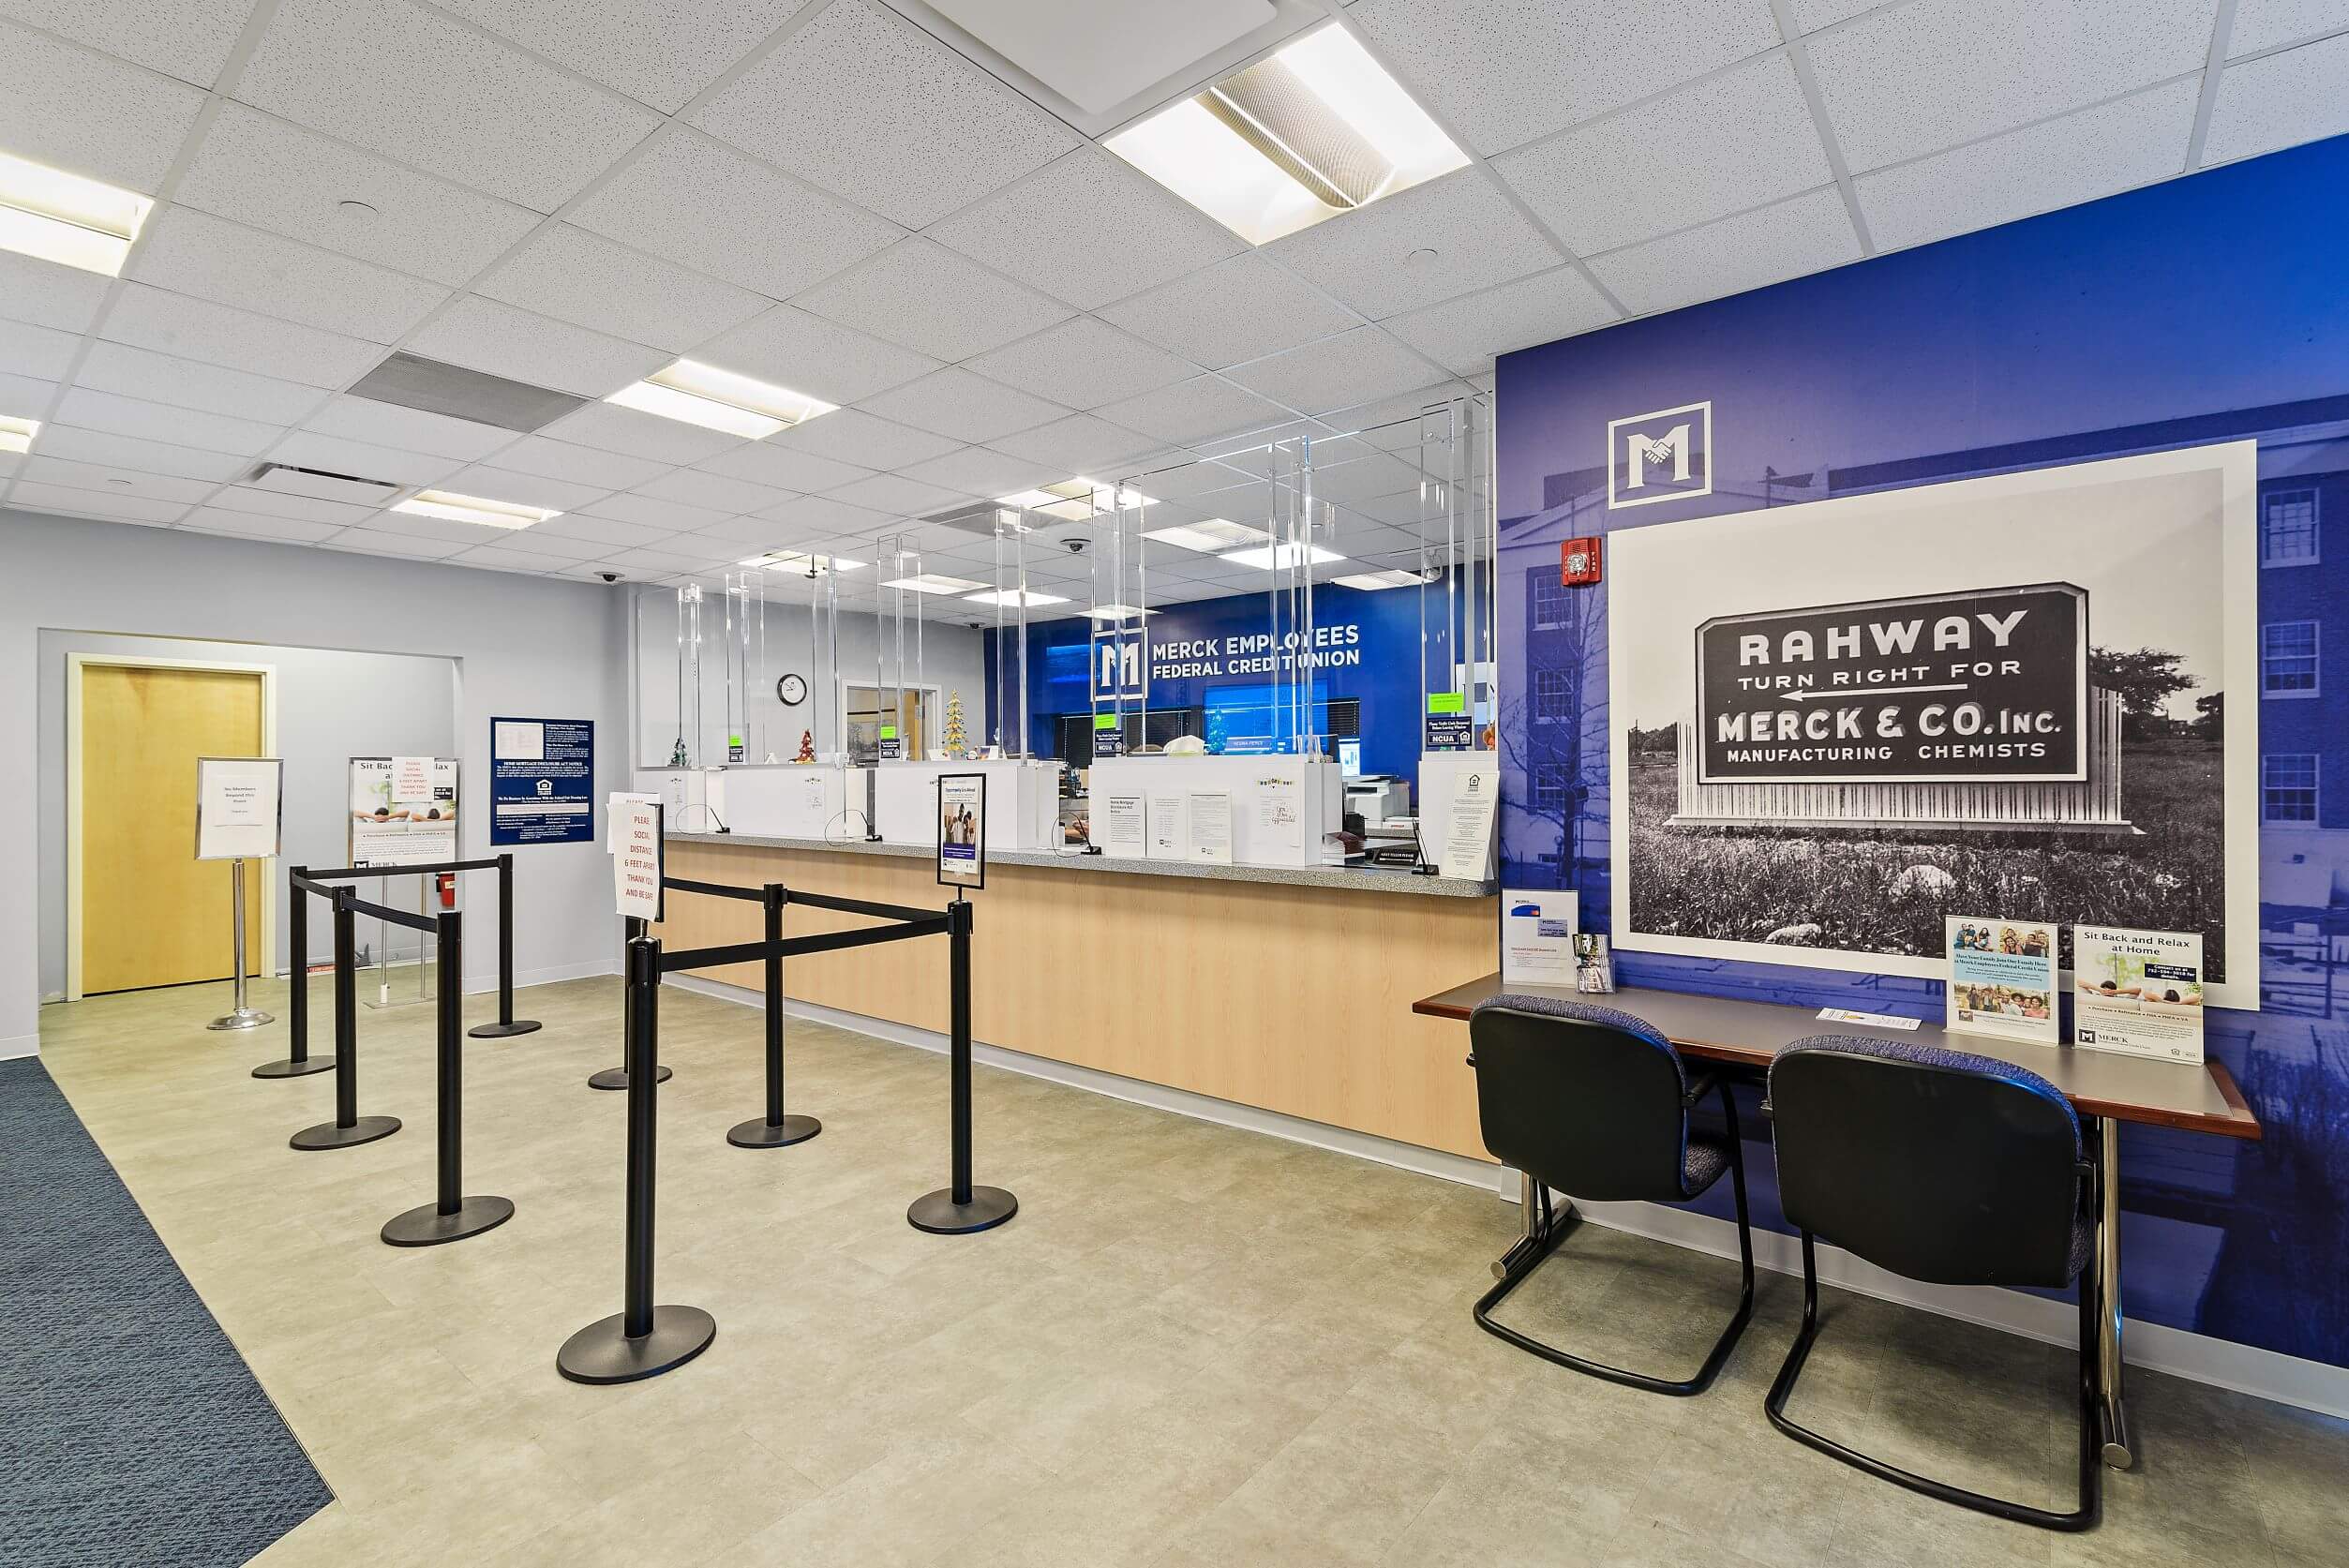 Teller lines and branded lobby space in a credit union